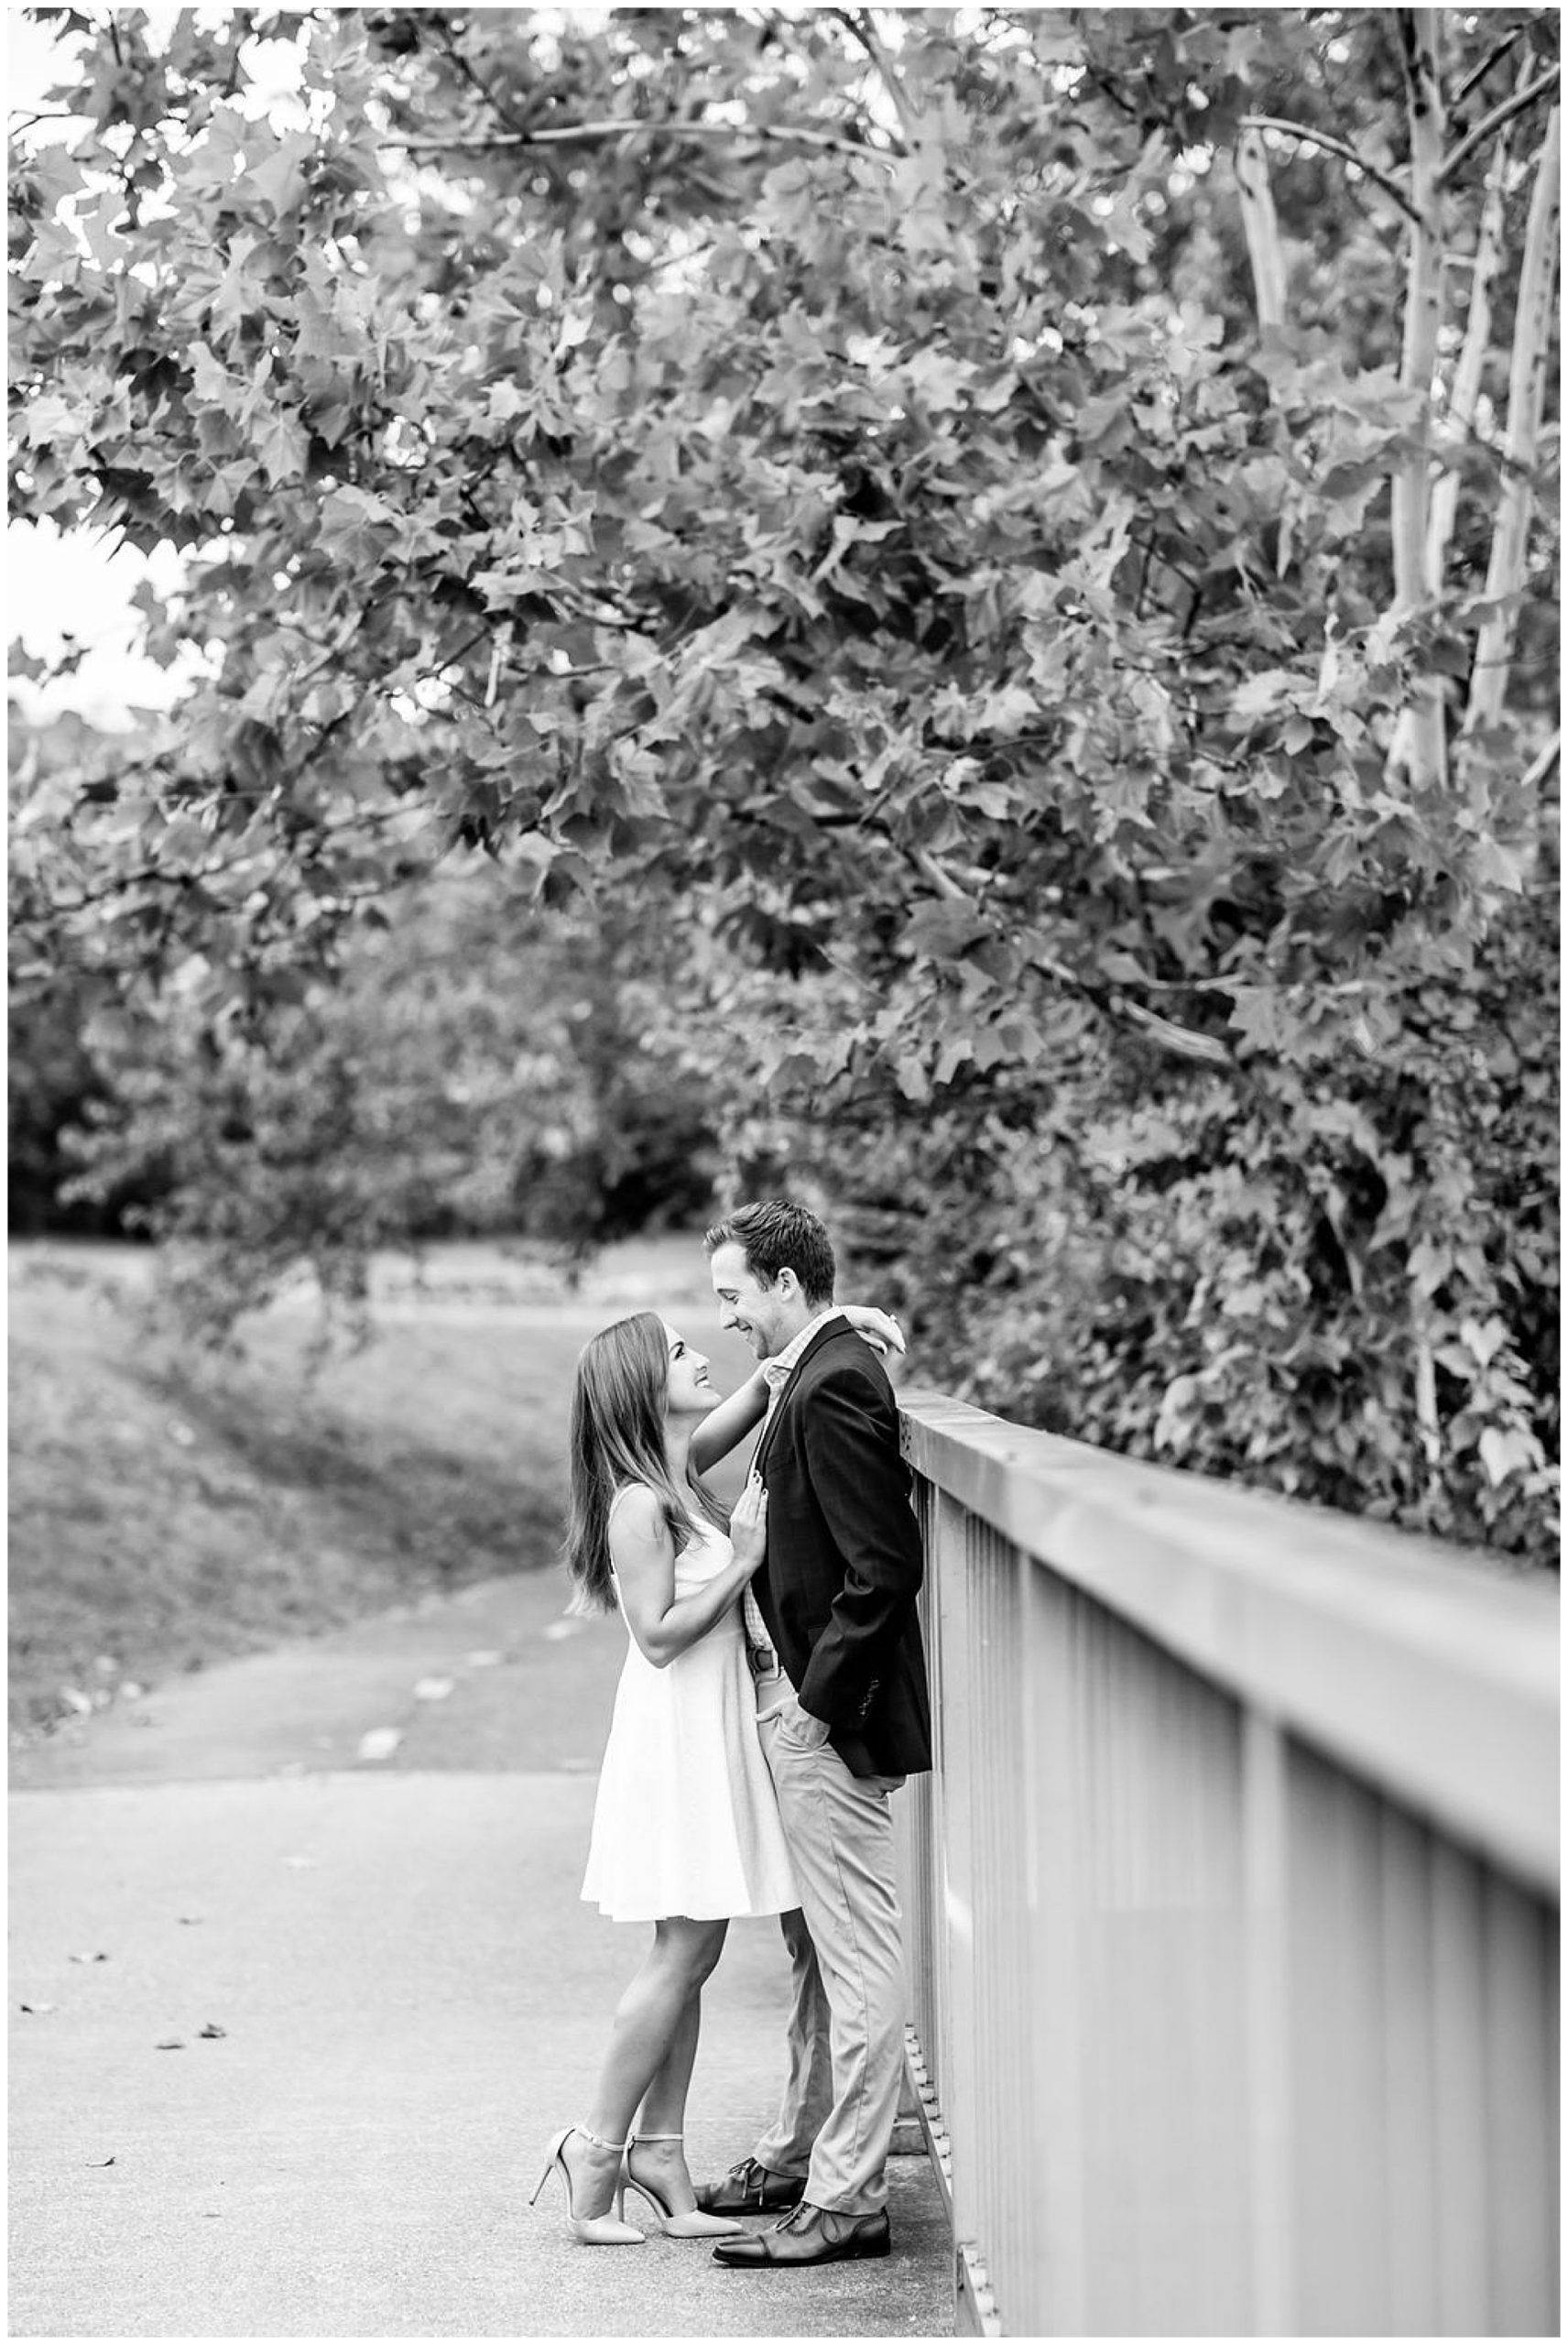 GW Parkway engagement photos, Roosevelt Island engagement photos, Mt. Vernon Trail engagement photos, Arlington engagement photos, DC engagement photos, waterfront engagement photos, autumn engagement photos, natural light engagement photos, Rachel E.H. Photography, black and white, man and woman against railing